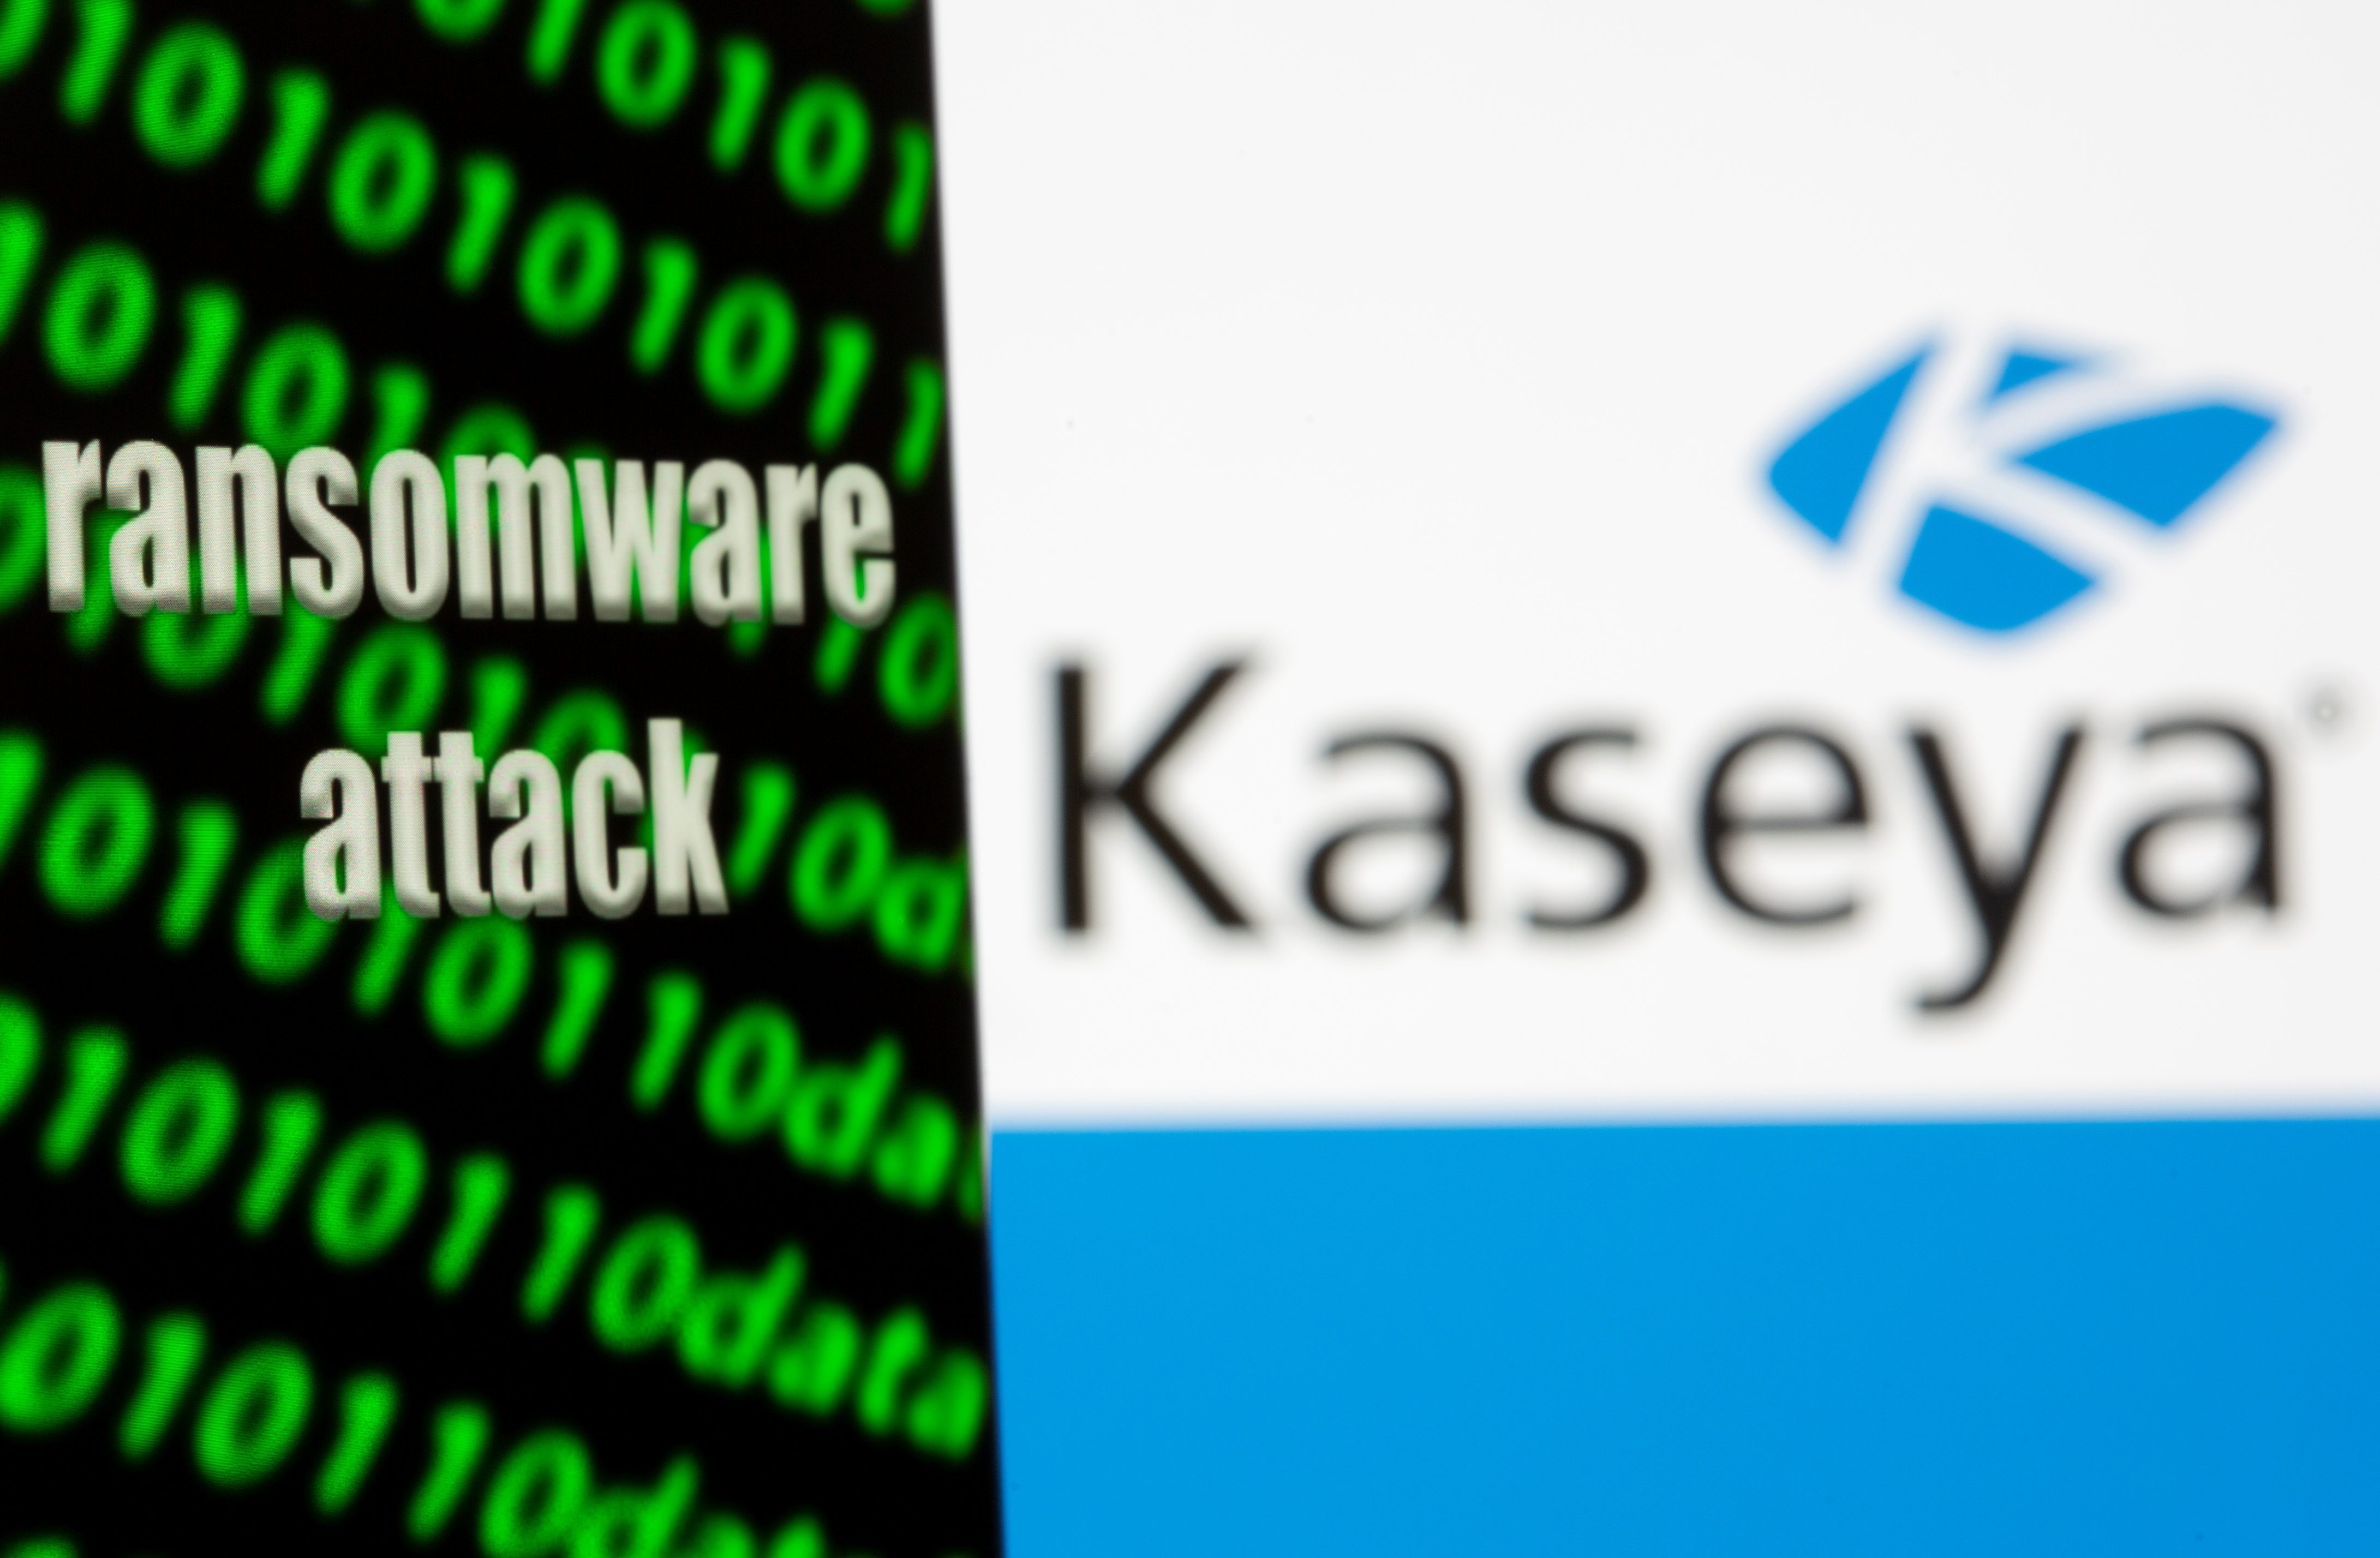 Kaseya ransomware attack sets off race to hack service providers – researchers